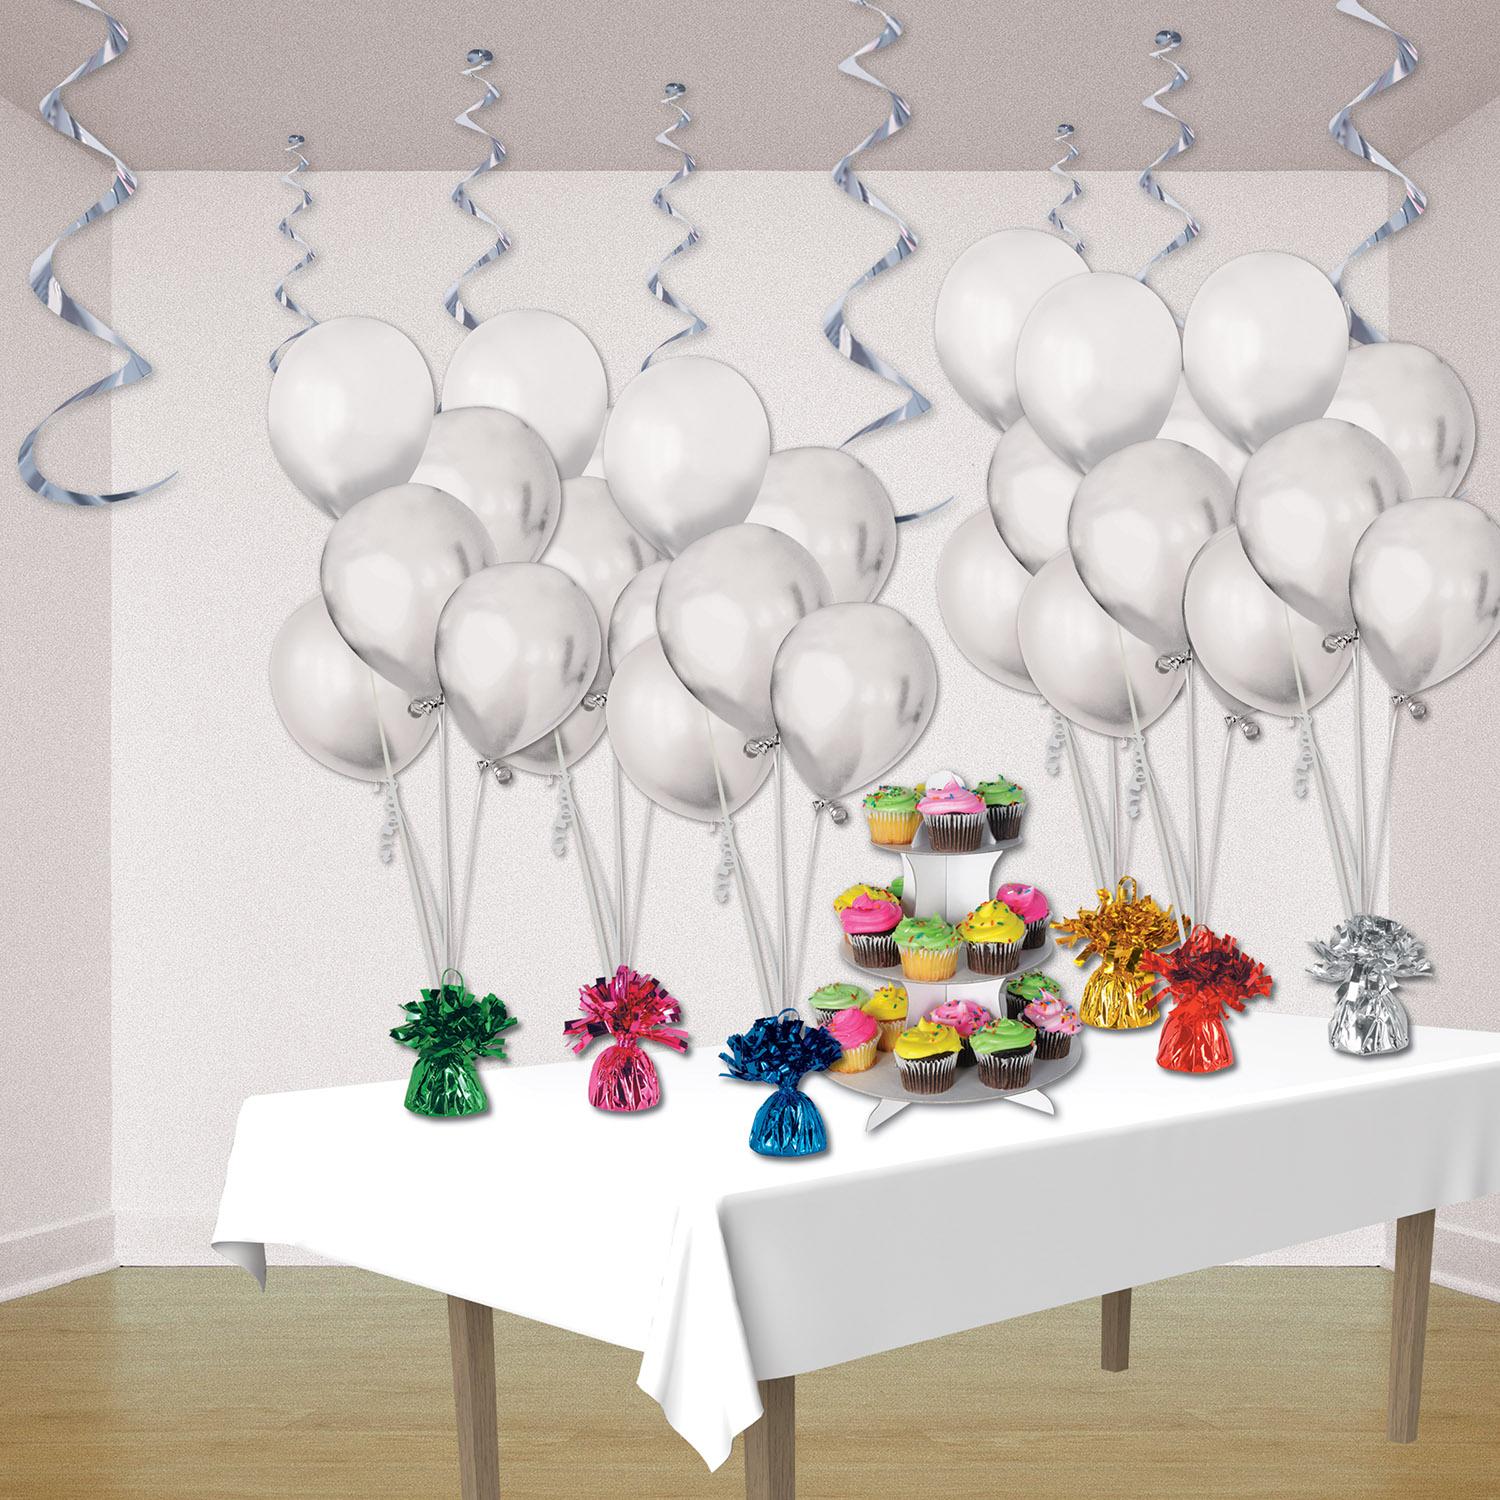 Beistle Metallic Wrapped Party Balloon Weights